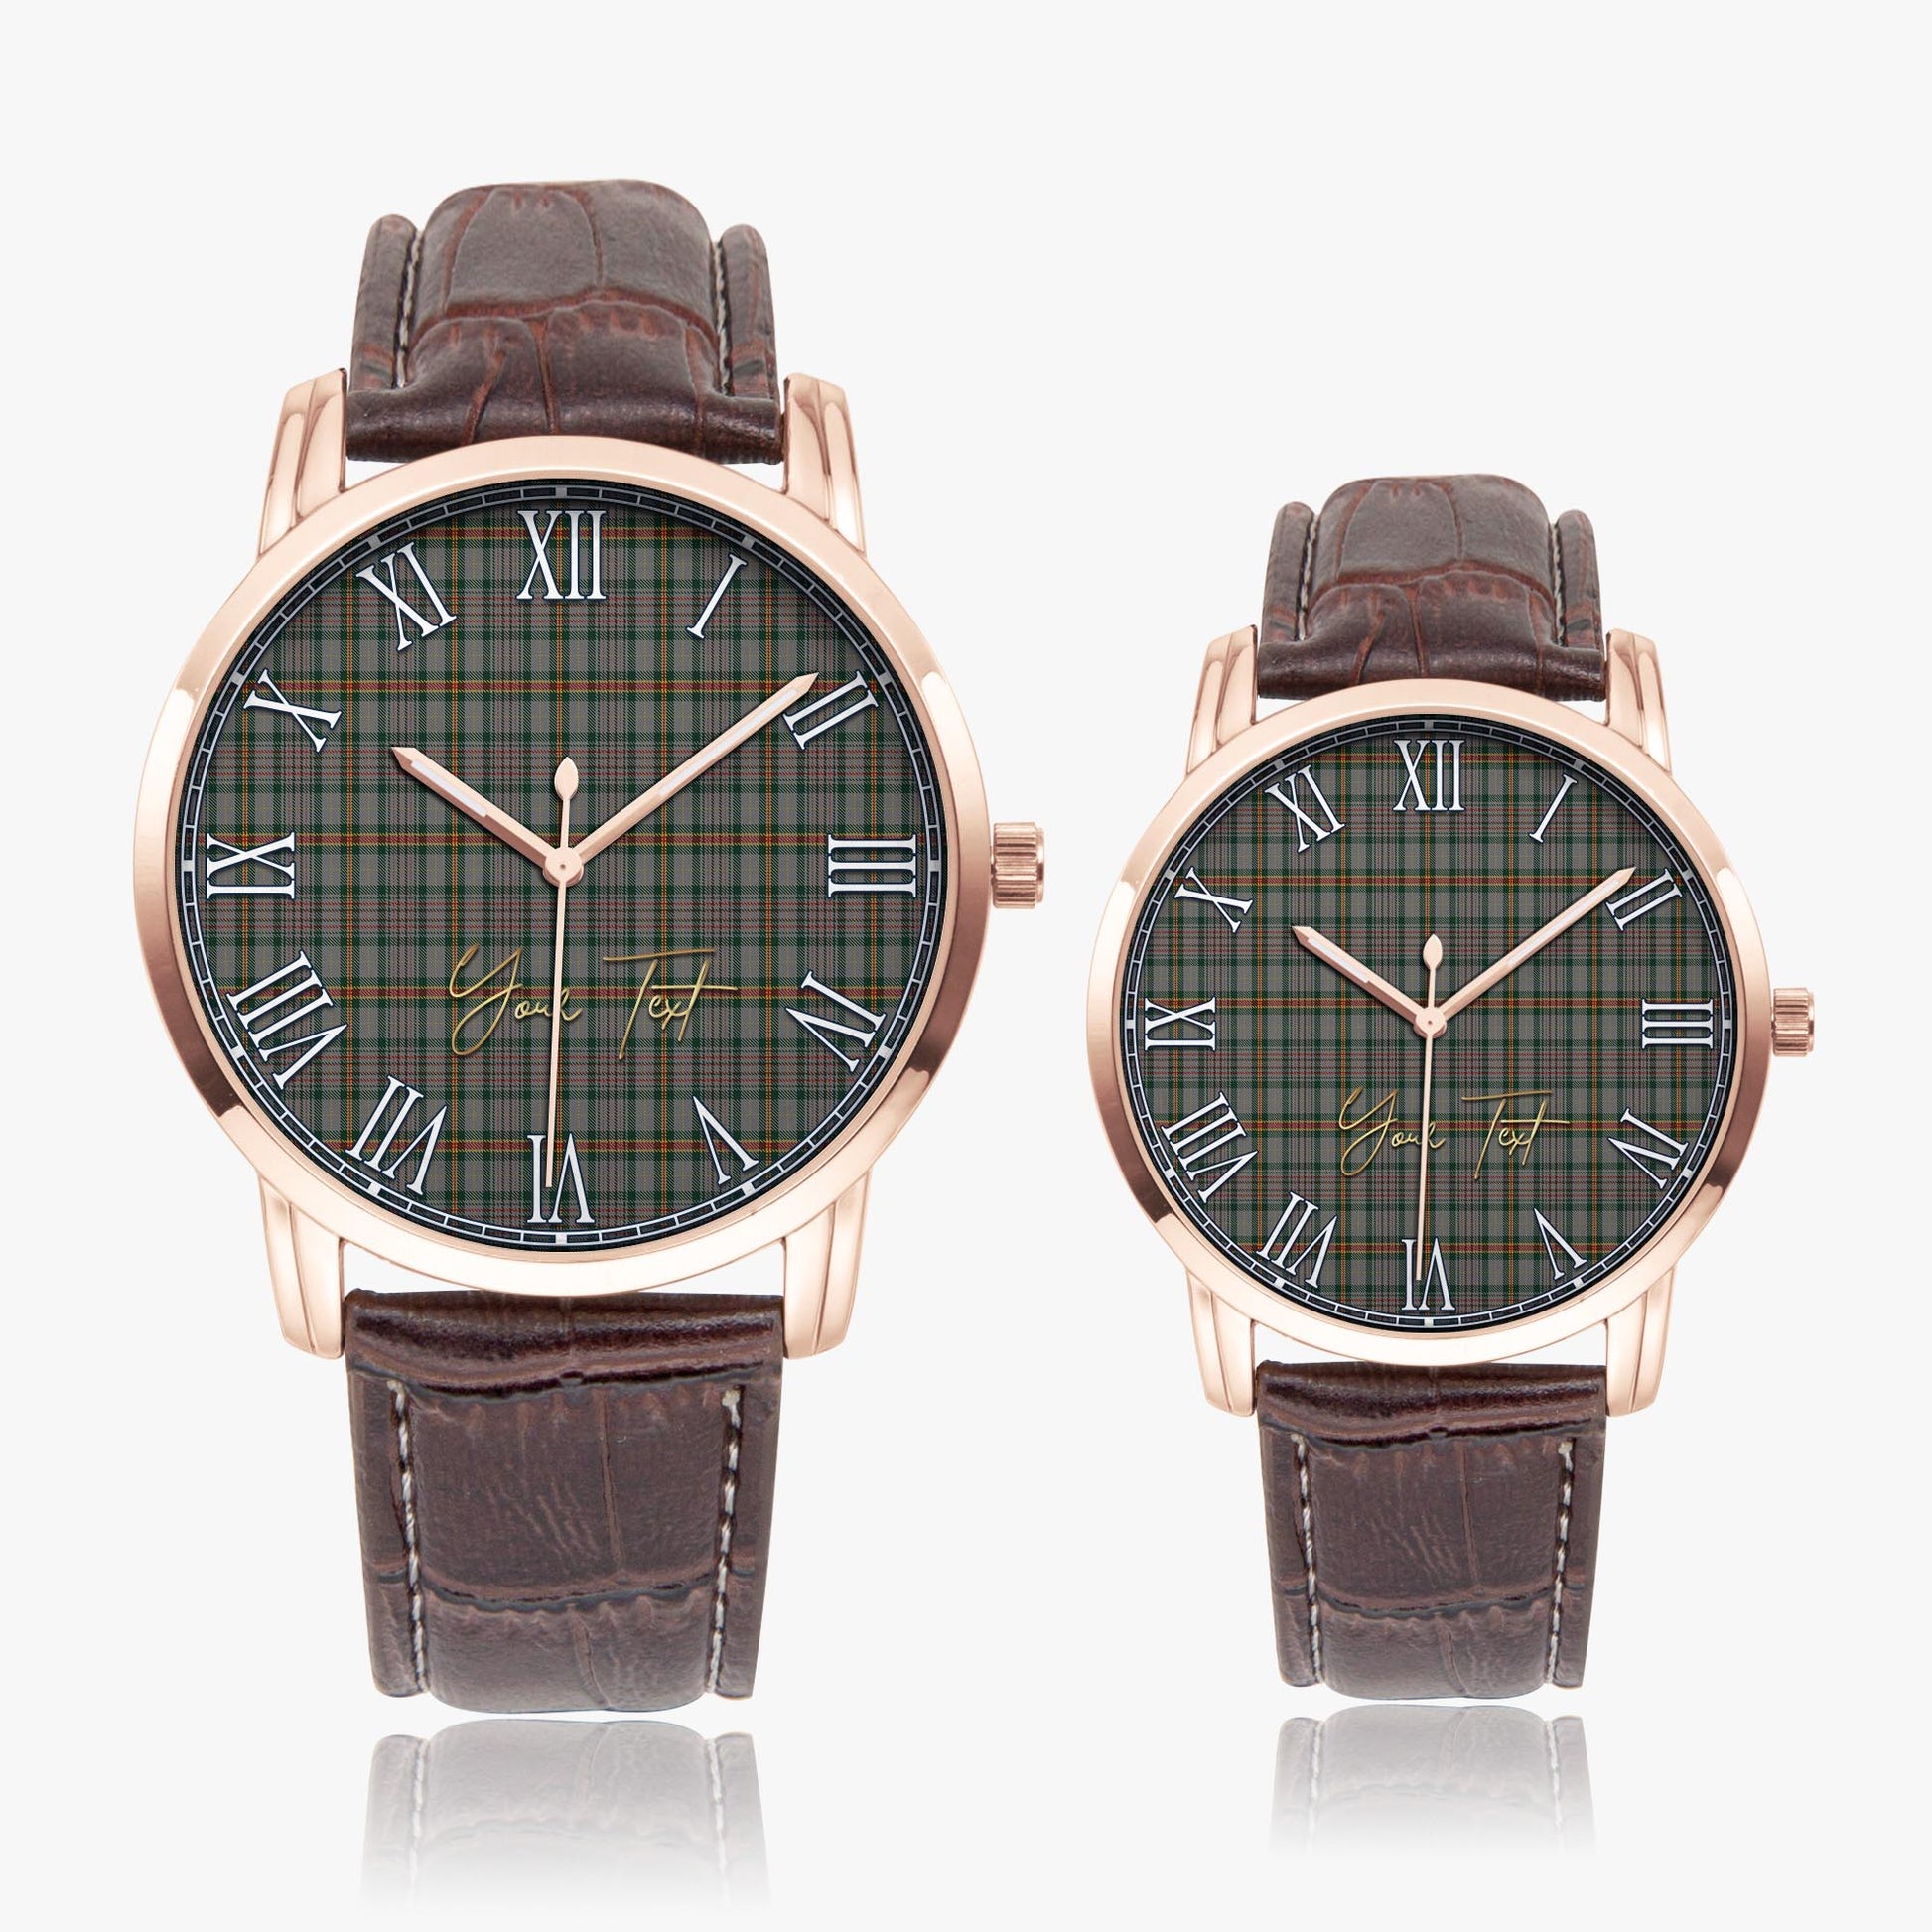 Howell of Wales Tartan Personalized Your Text Leather Trap Quartz Watch Wide Type Rose Gold Case With Brown Leather Strap - Tartanvibesclothing